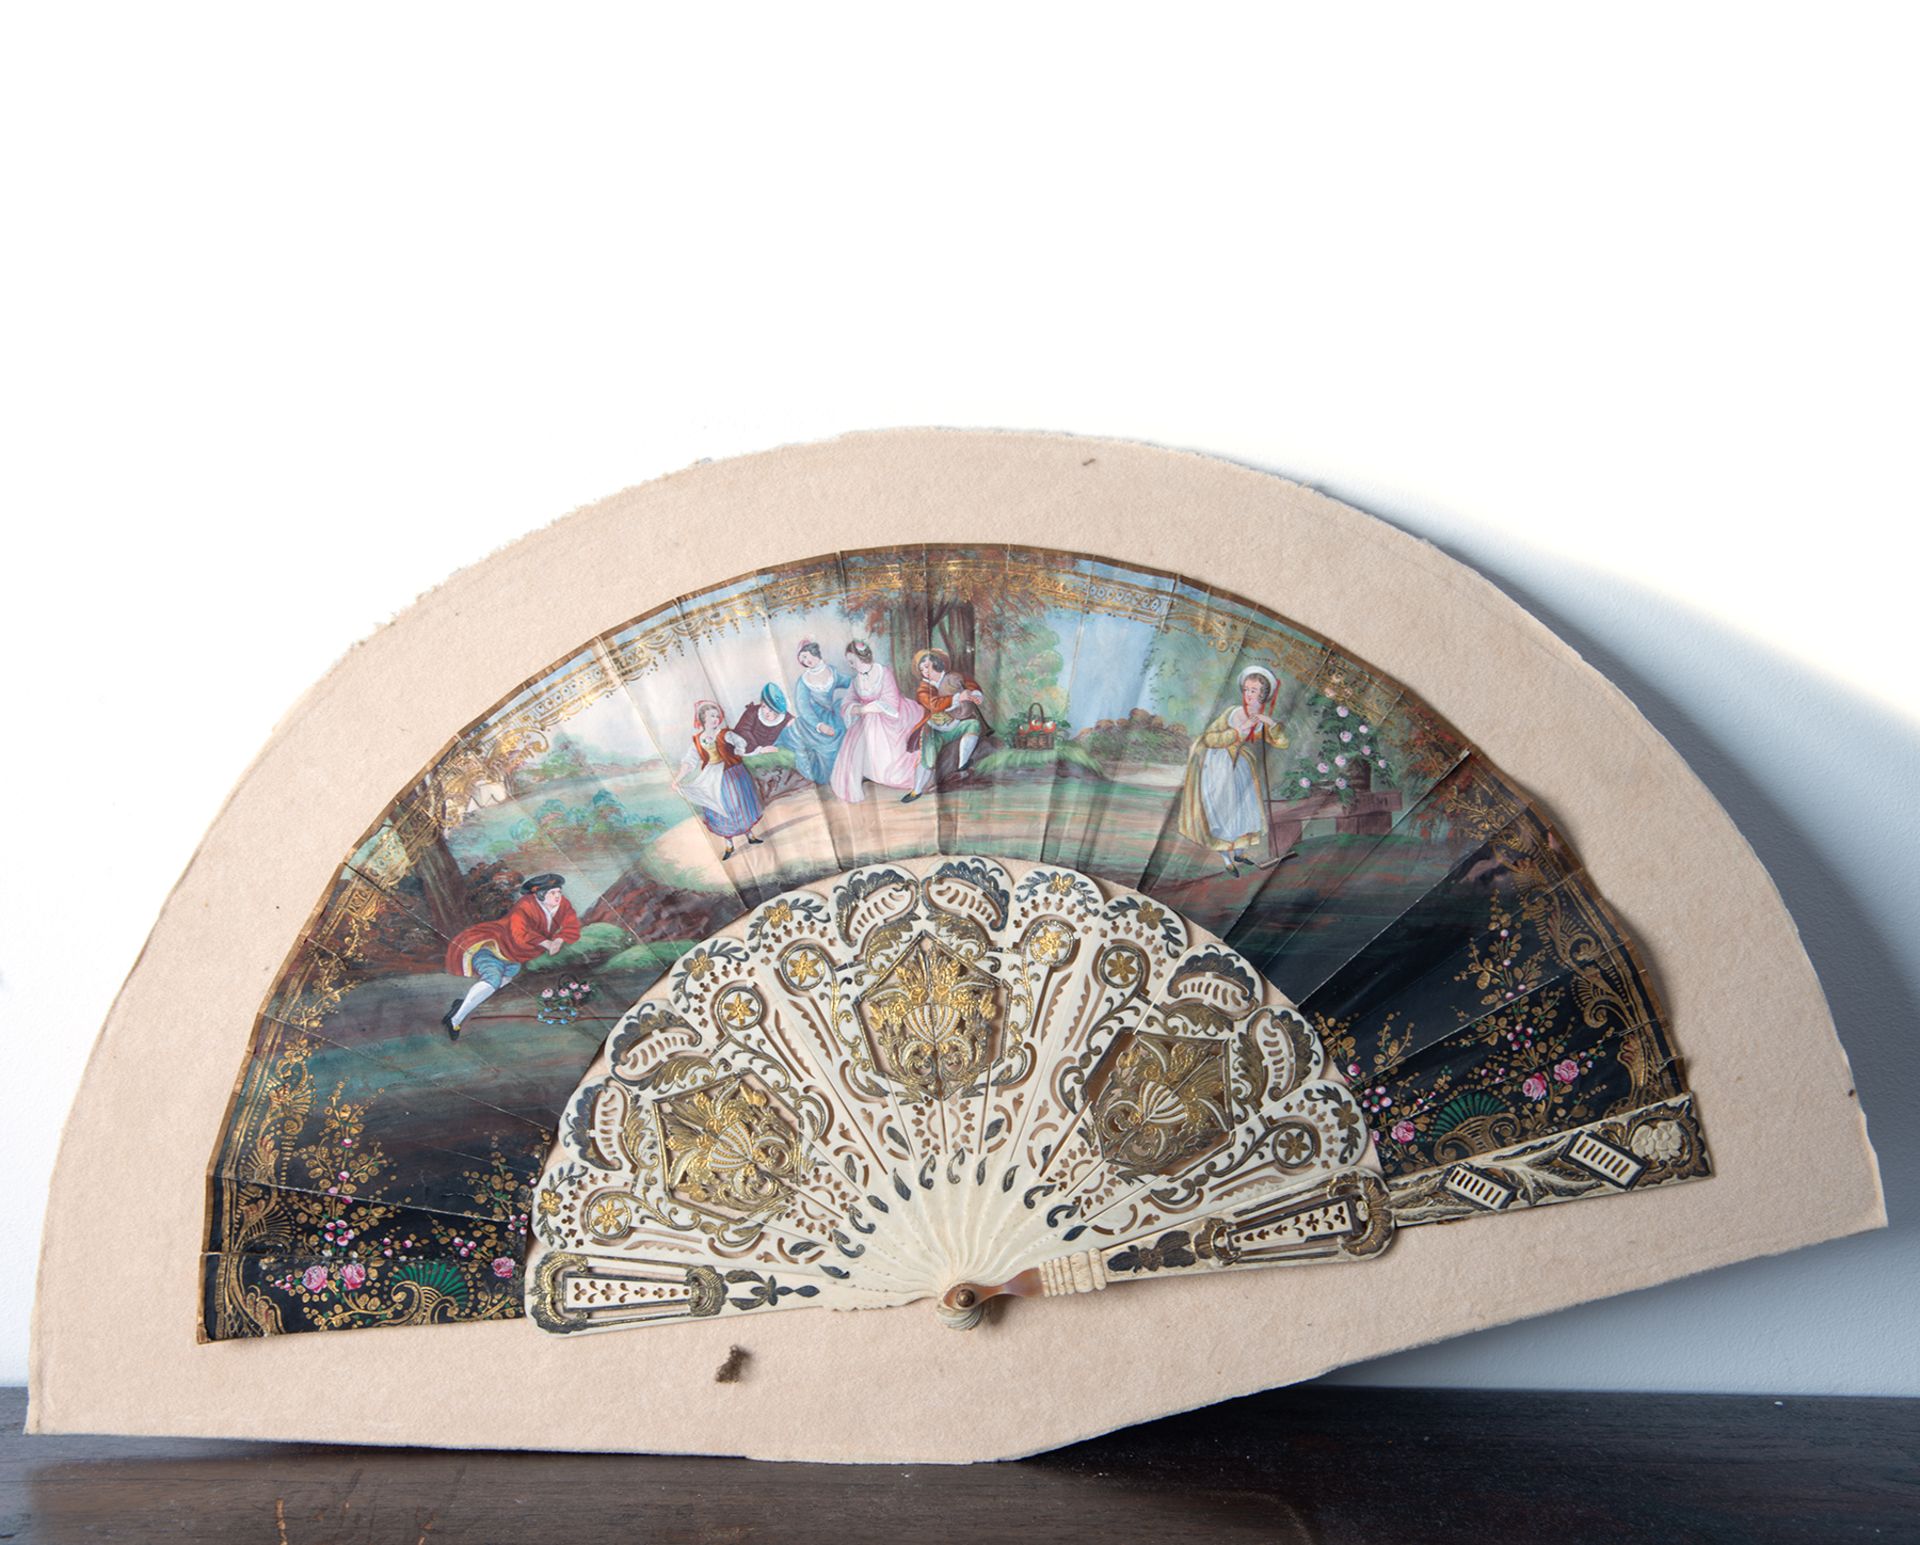 Fan with a hand-painted gallant scene, 19th century